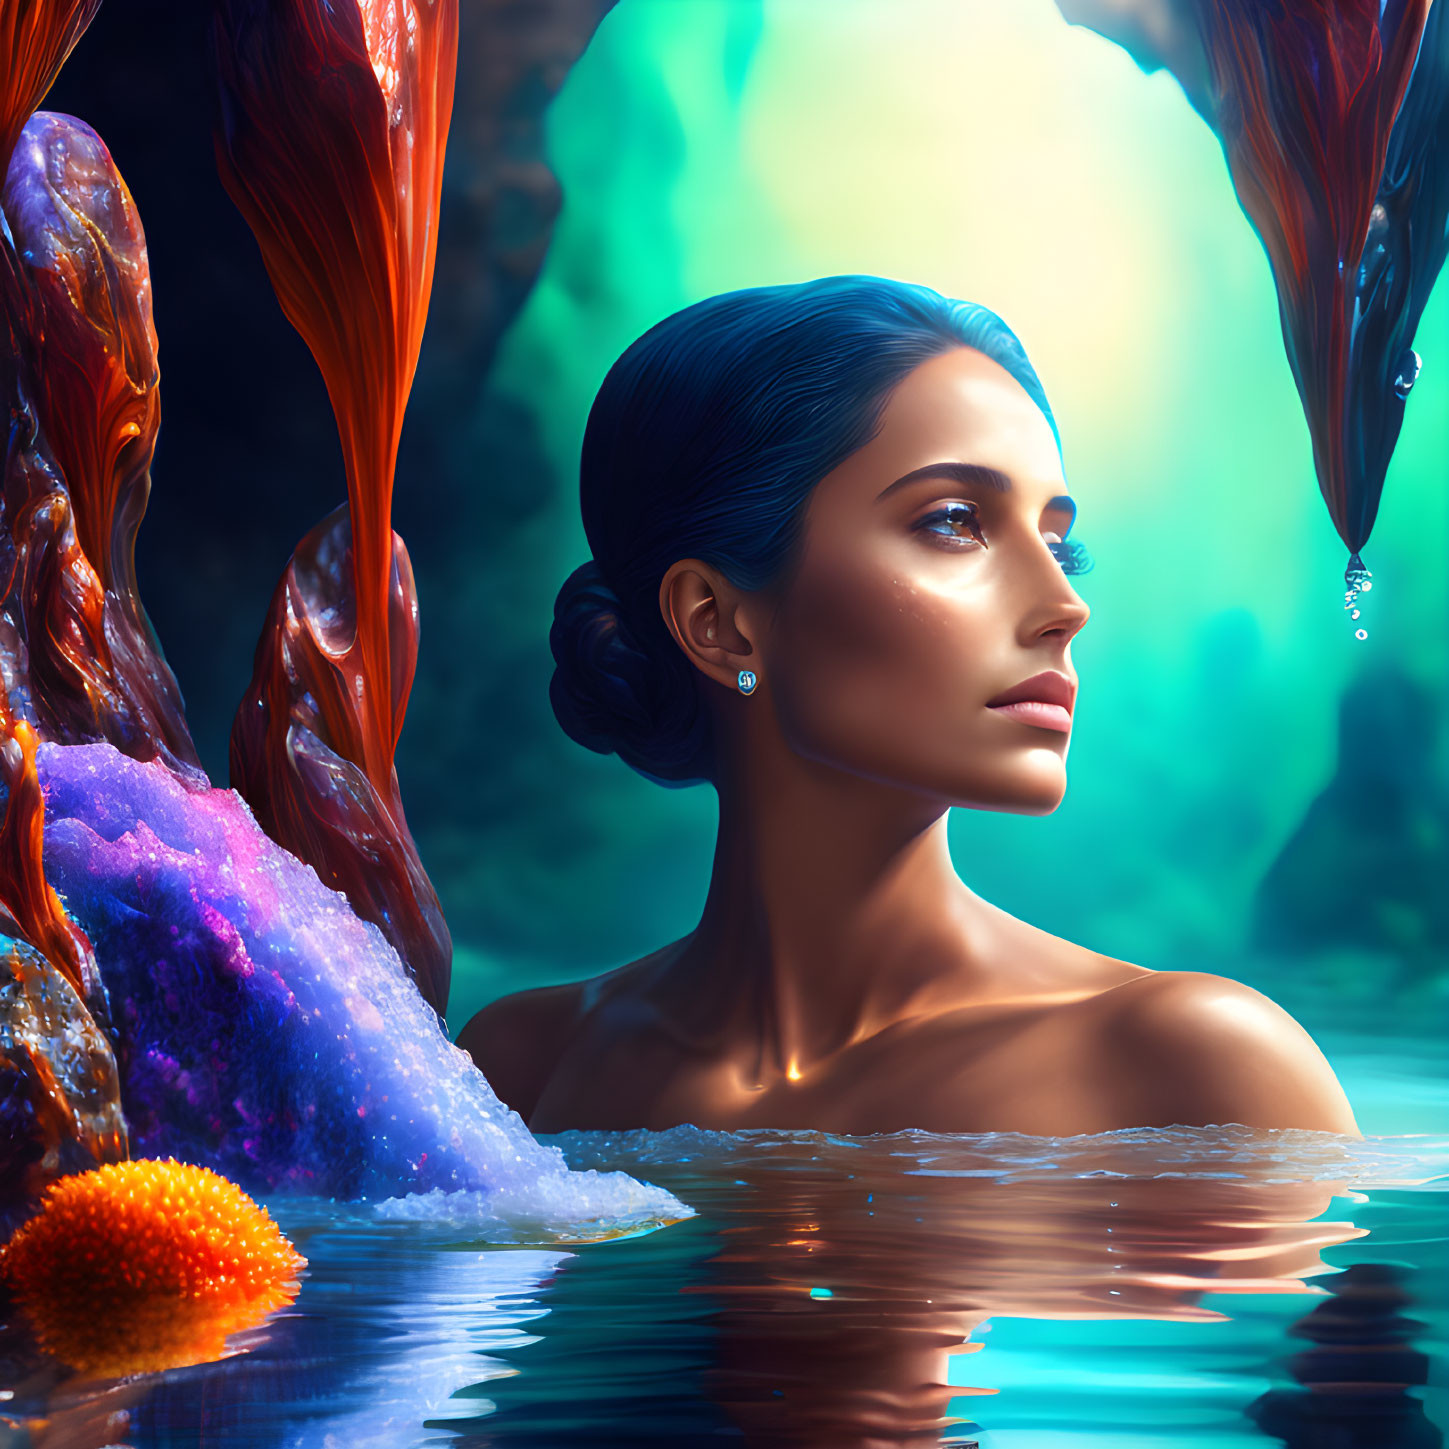 Woman in Water Surrounded by Vibrant Underwater Flora